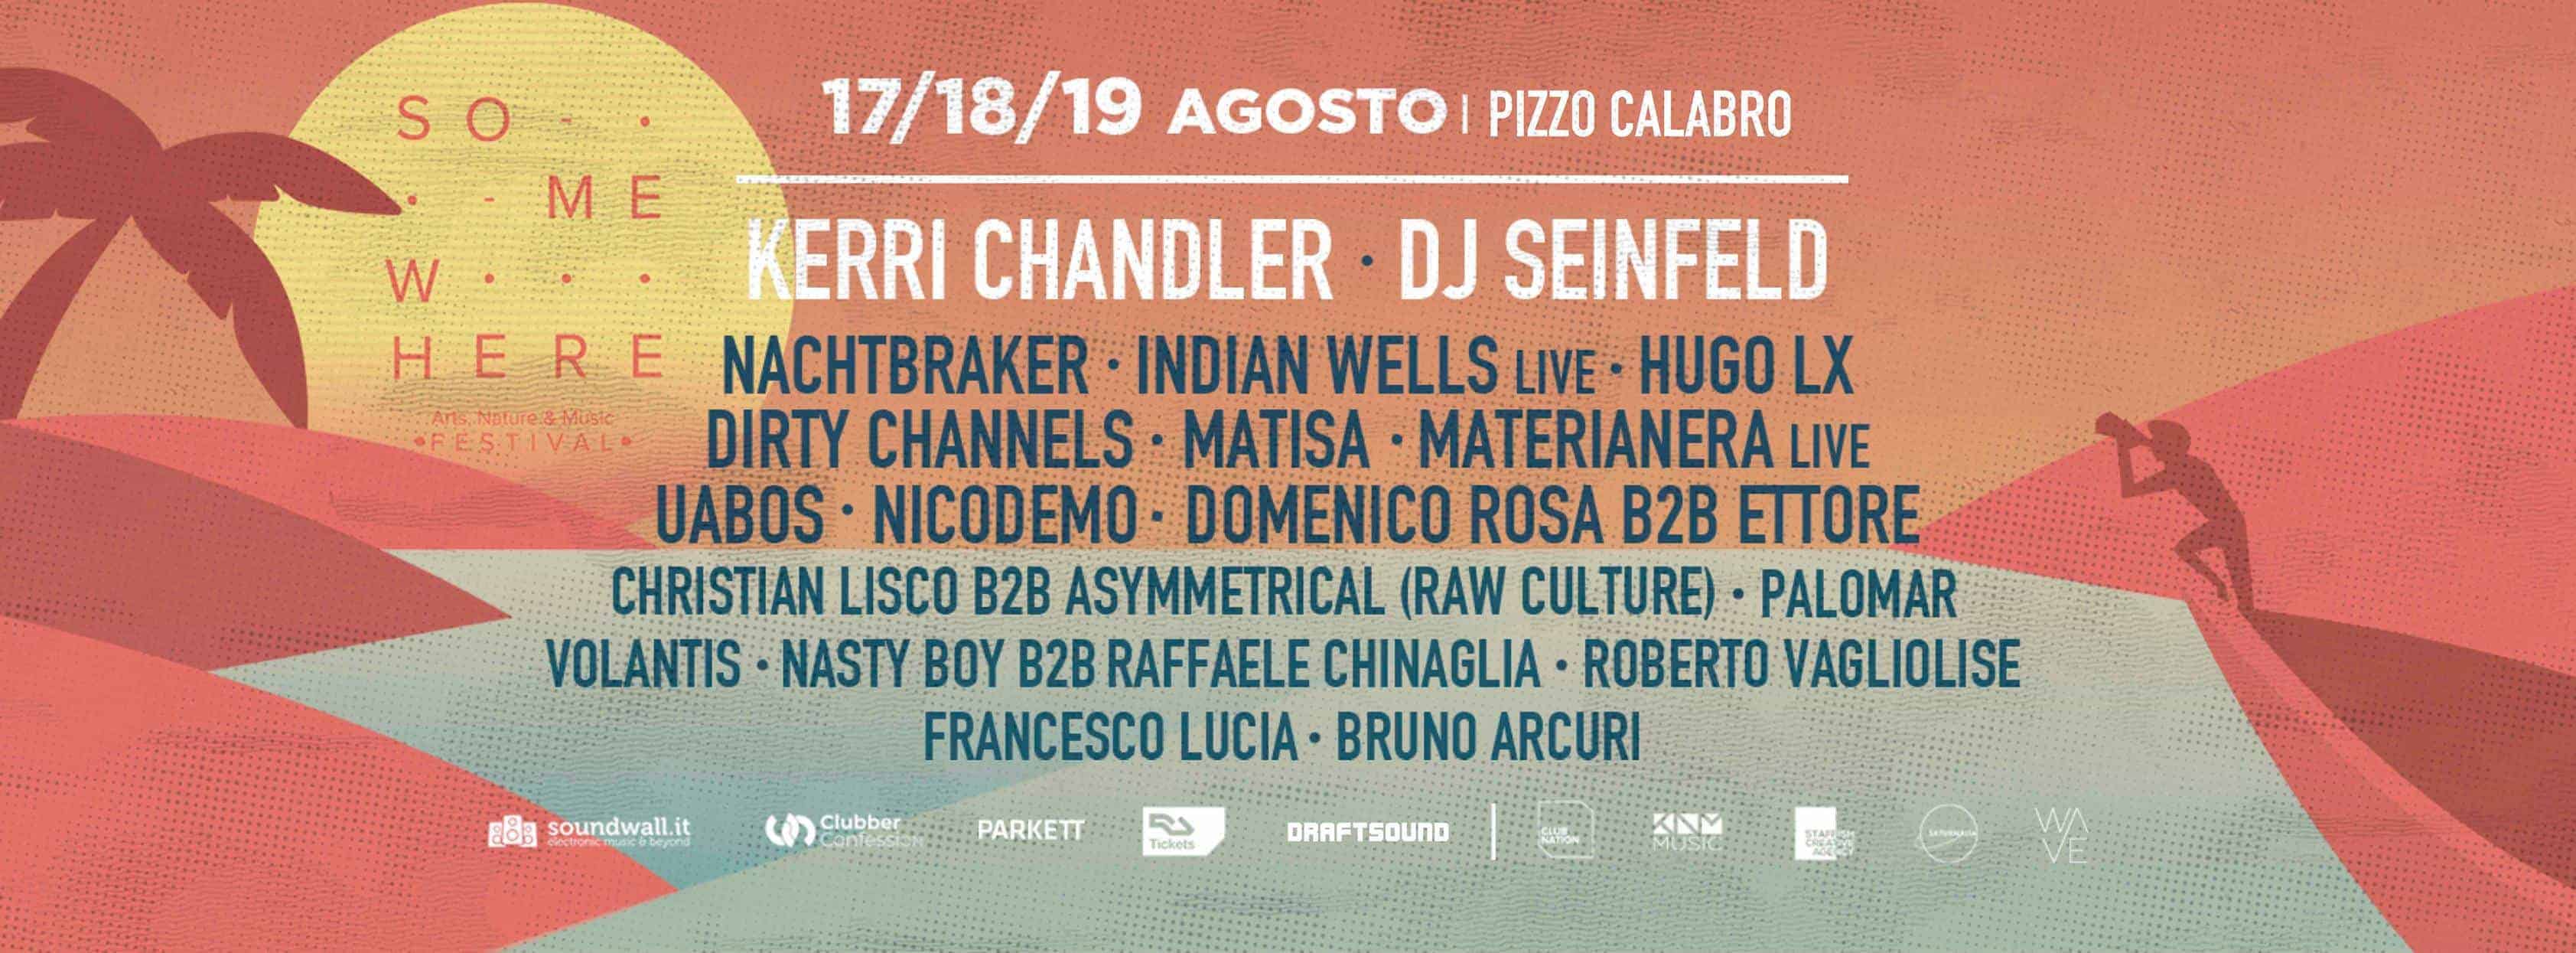 Somewhere 2018 - South Italy Music Festival